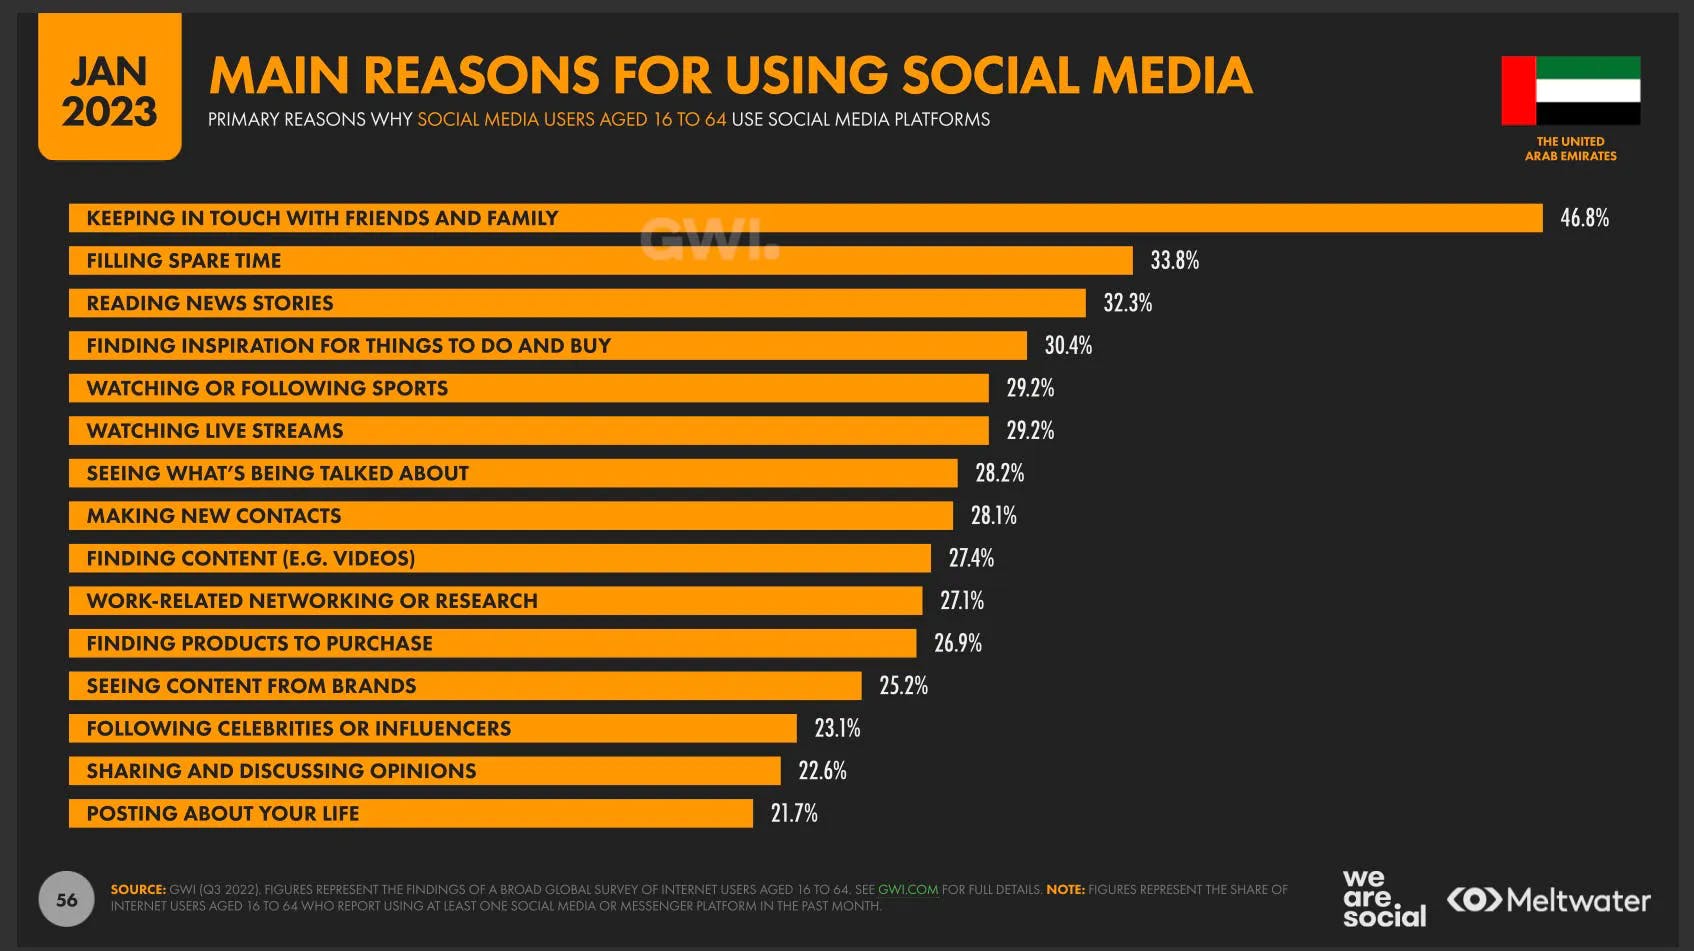 Statistic of the most used social media platforms in the UAE